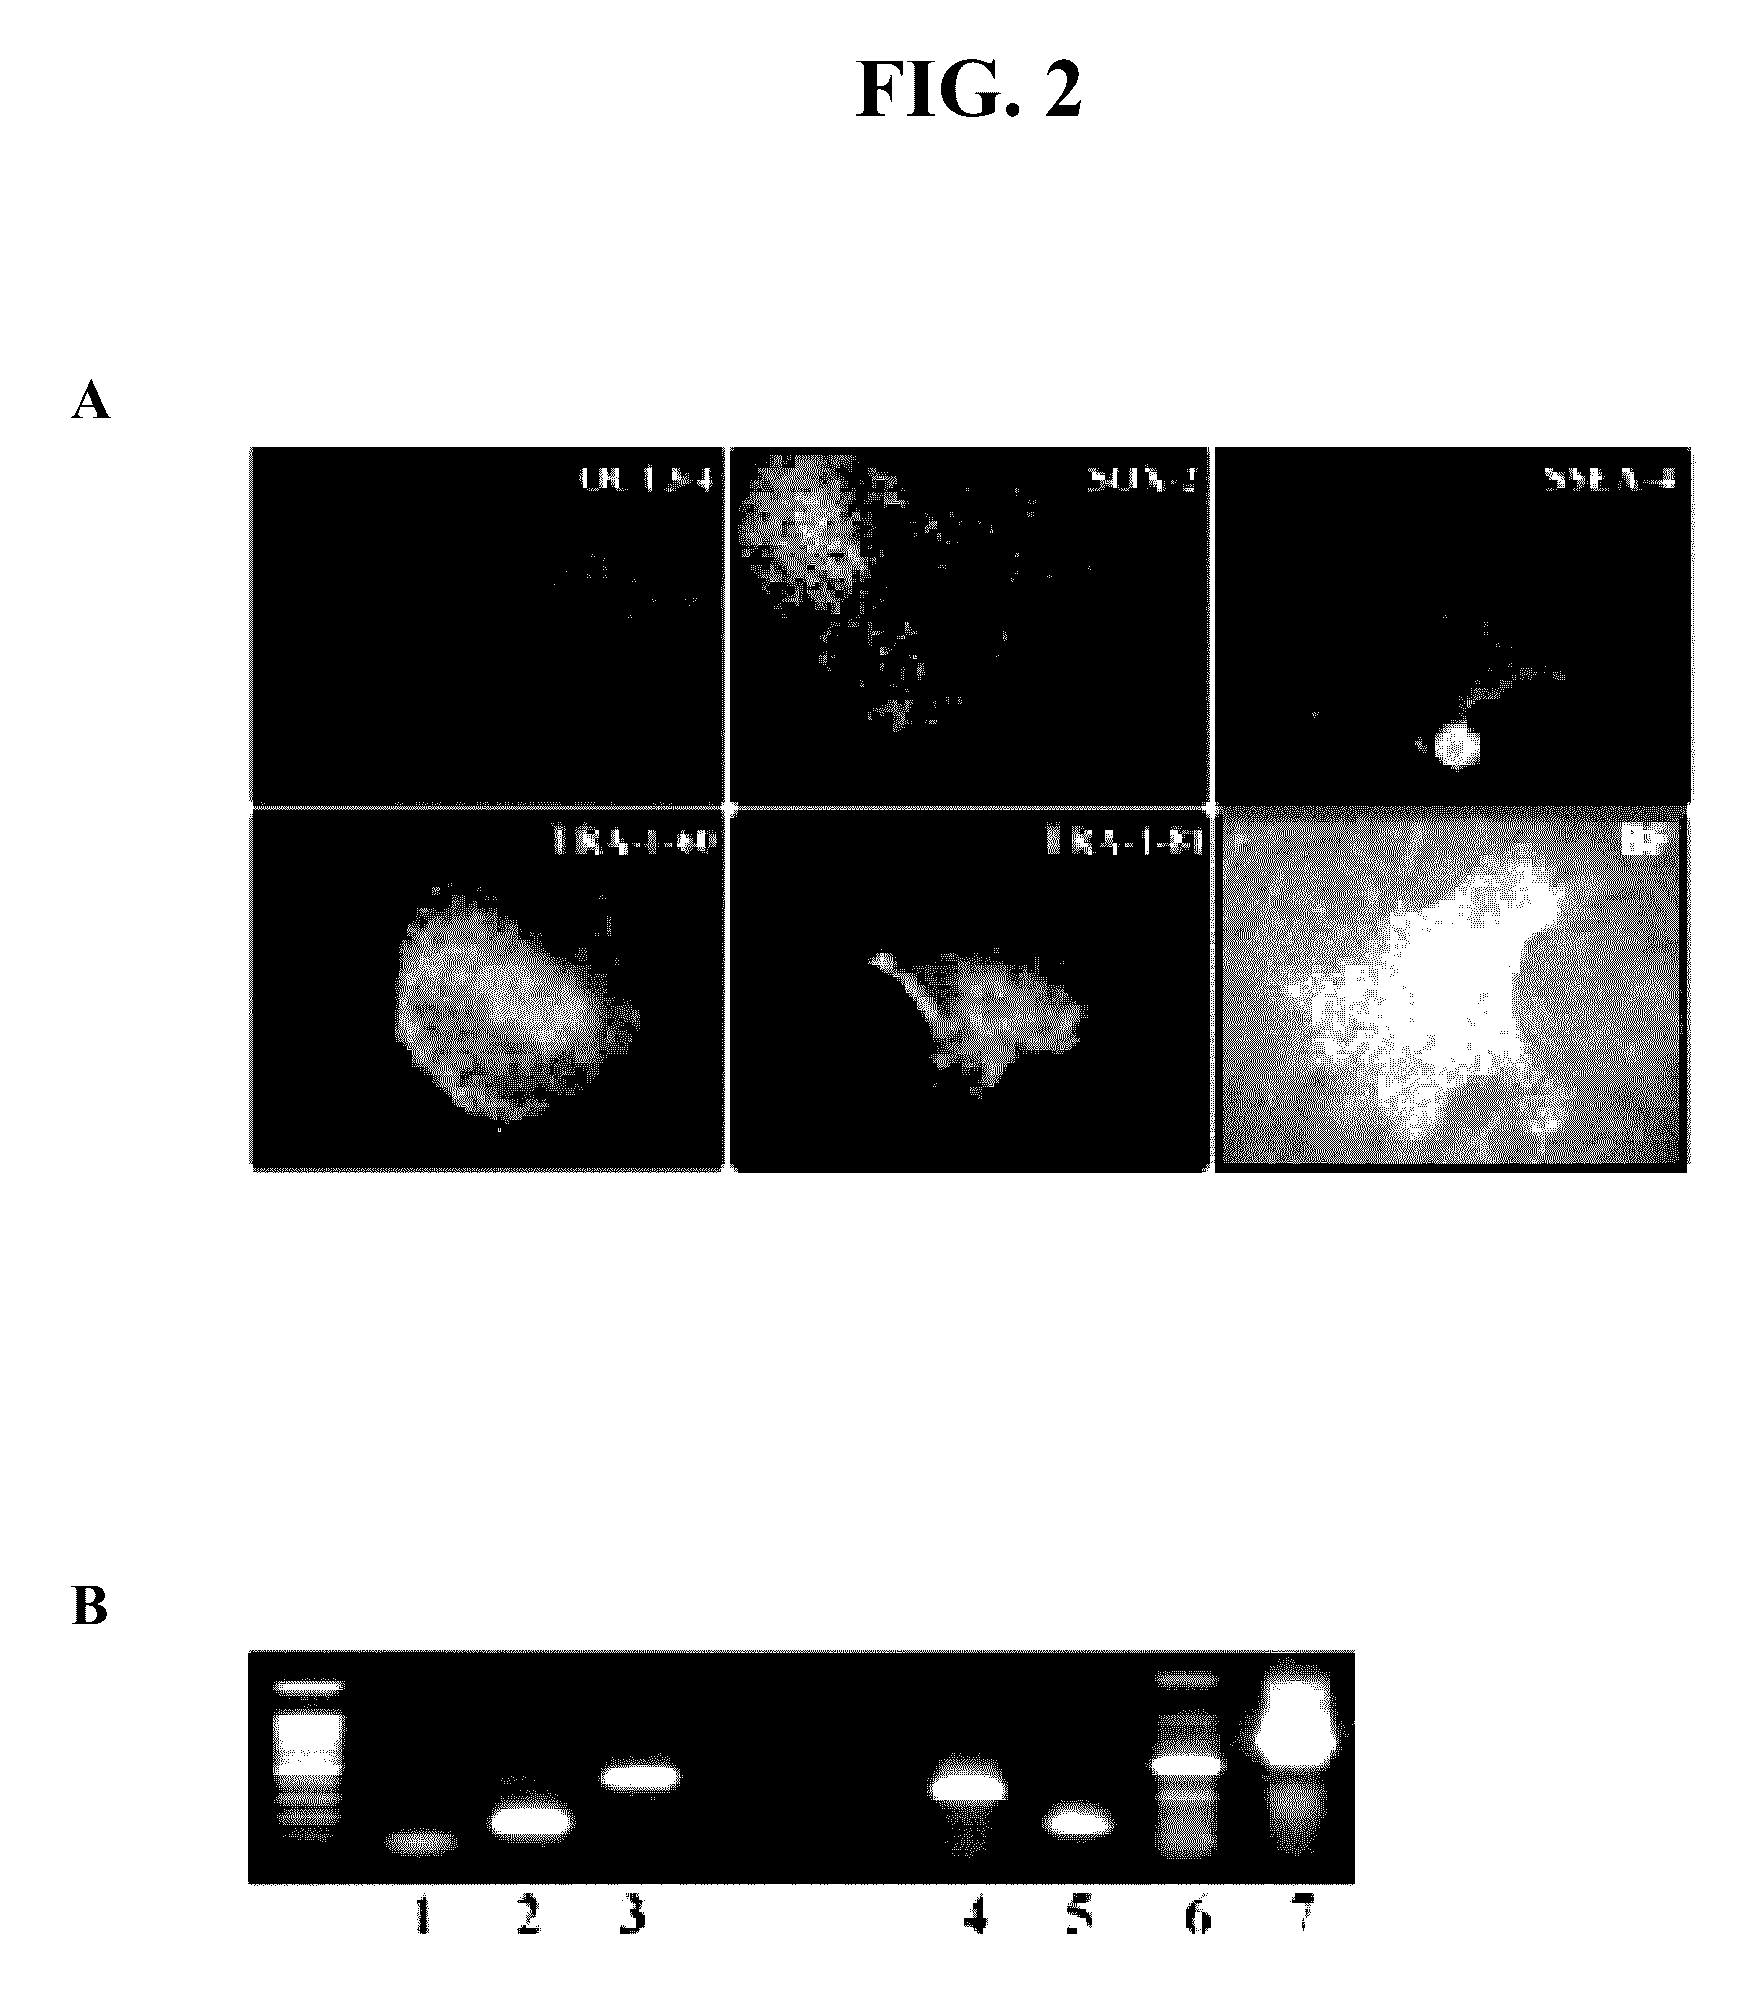 Methods and compositions for growth of cells and embryonic tissue on a synthetic polymer matrix